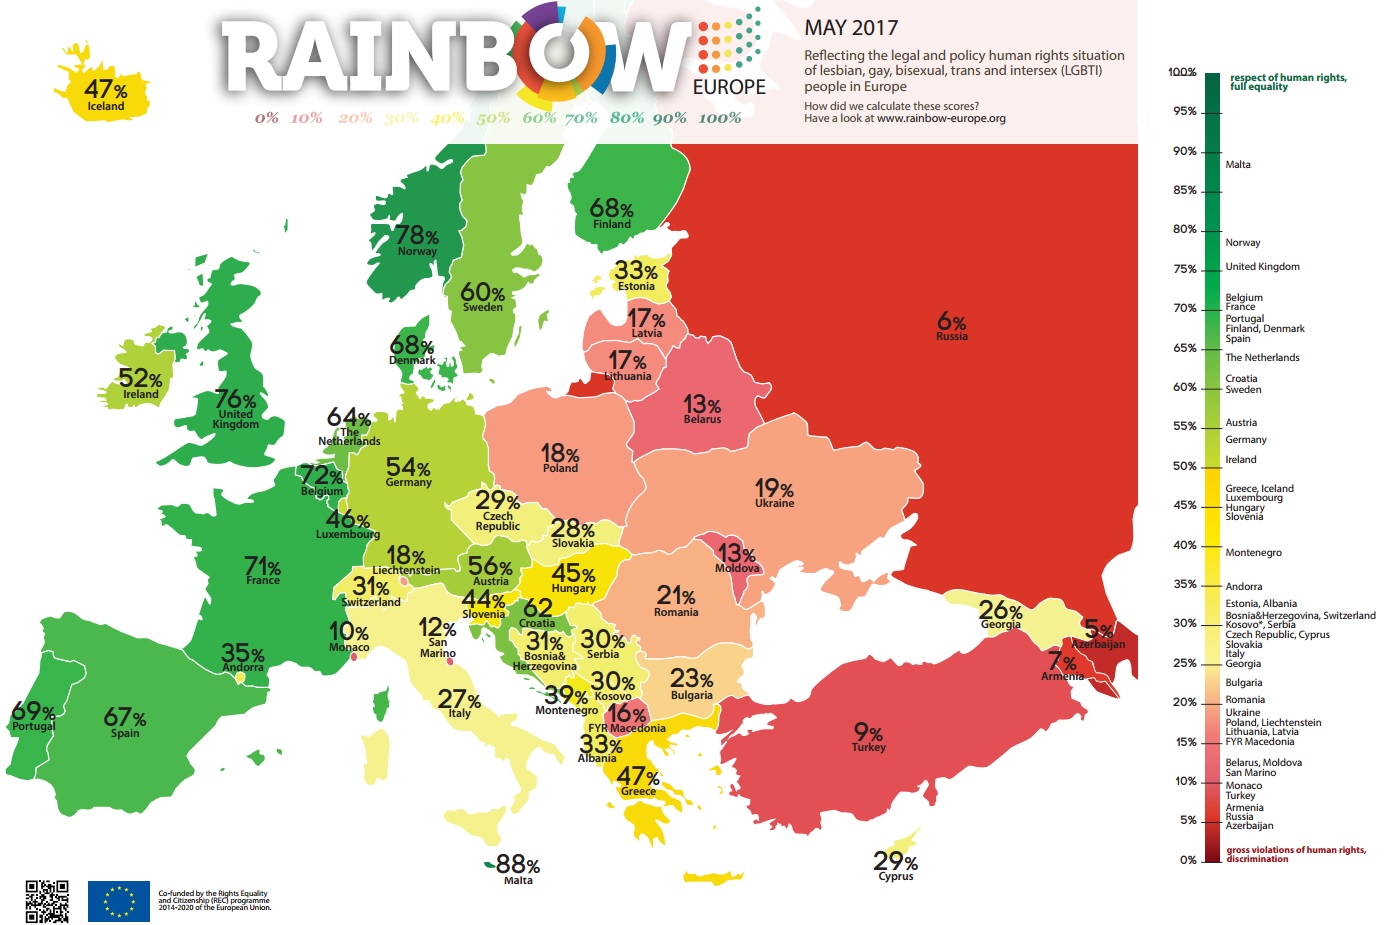 International Day against Homophobia: top European countries where LGBT community faces most discrimination